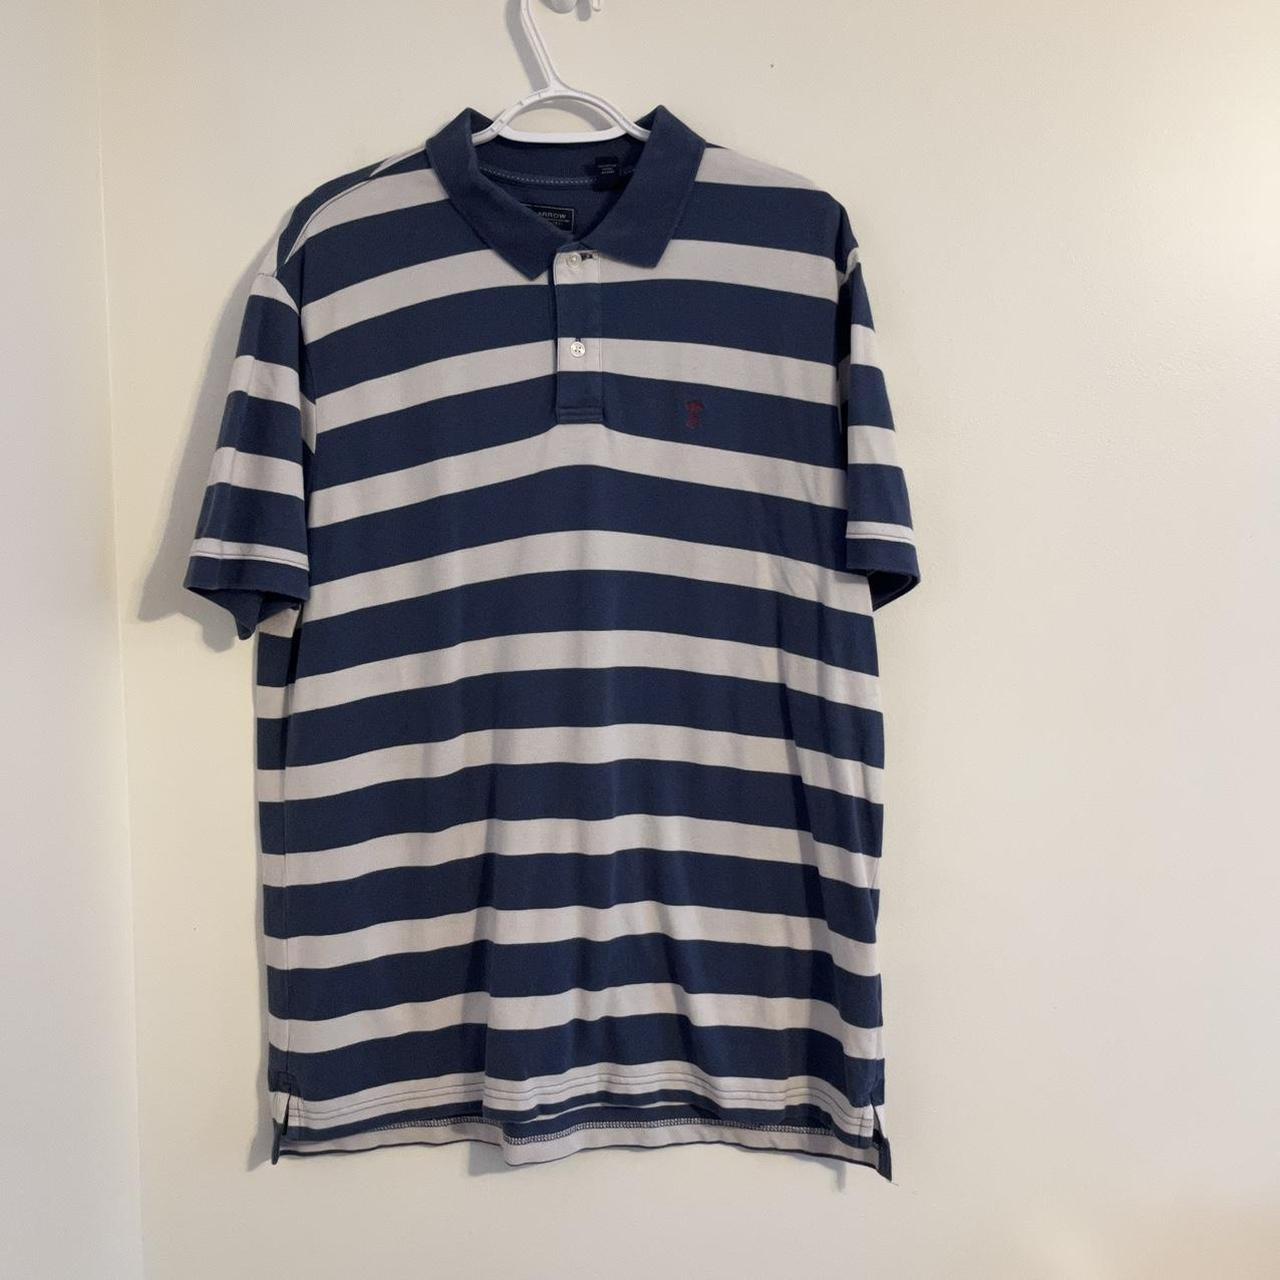 Product Image 1 - Vintage stripped polo shirt

tagged size